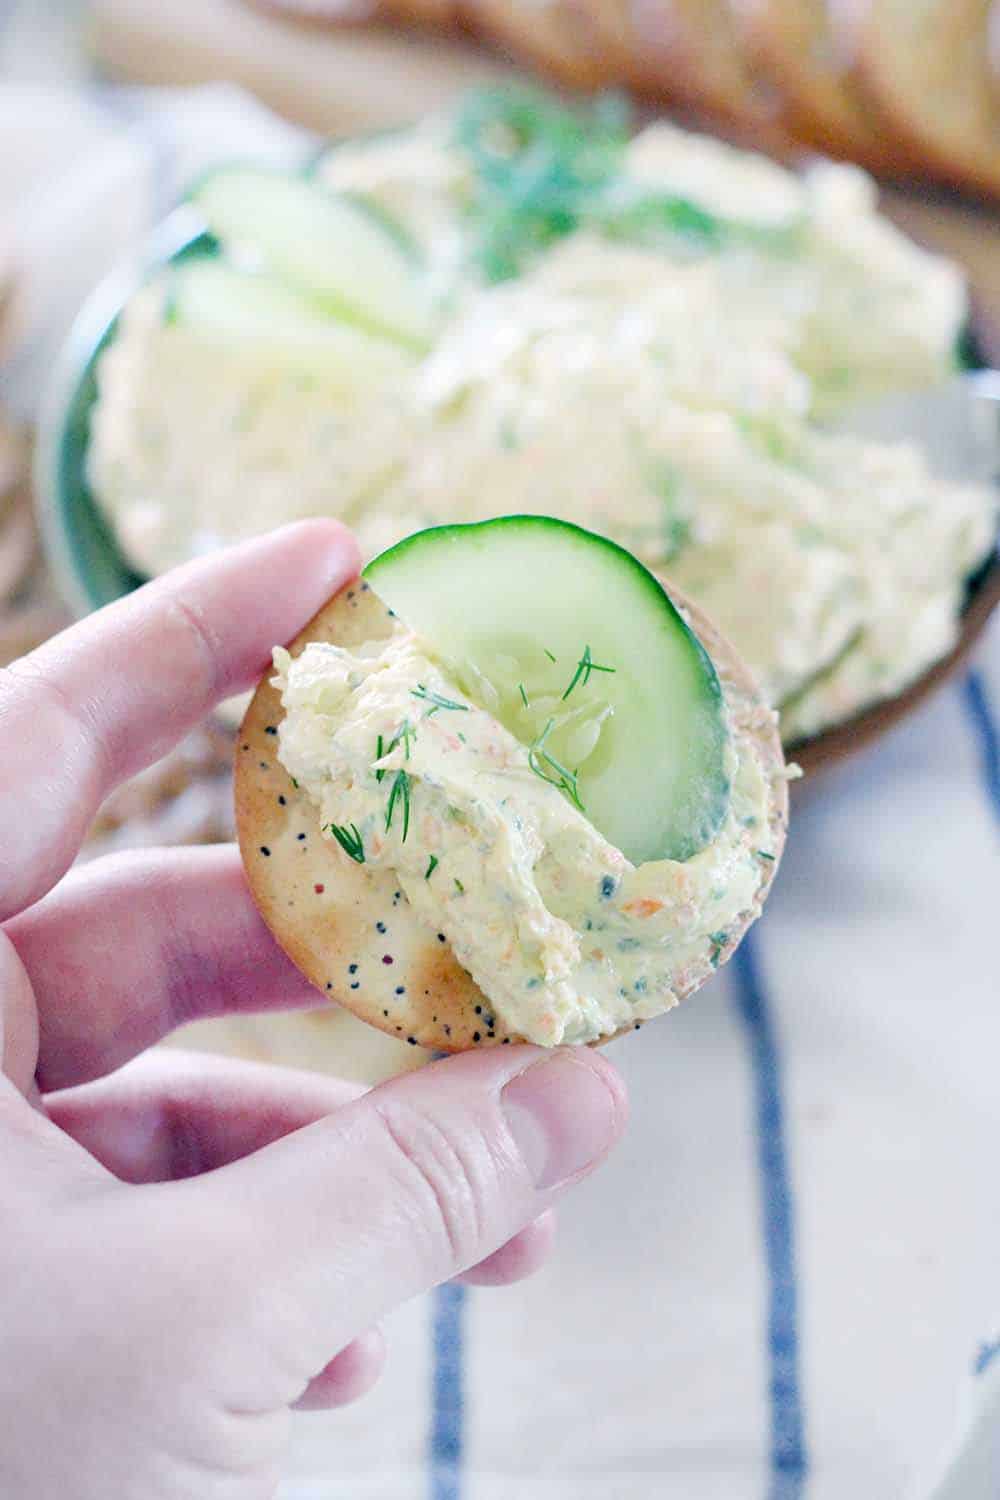 This veggie cream cheese is great as a dip for crackers or veggies, and equally amazing on sandwiches with cucumber slices as a light lunch or classy appetizer. It's gluten-free, vegetarian, and only takes a few minutes to make!